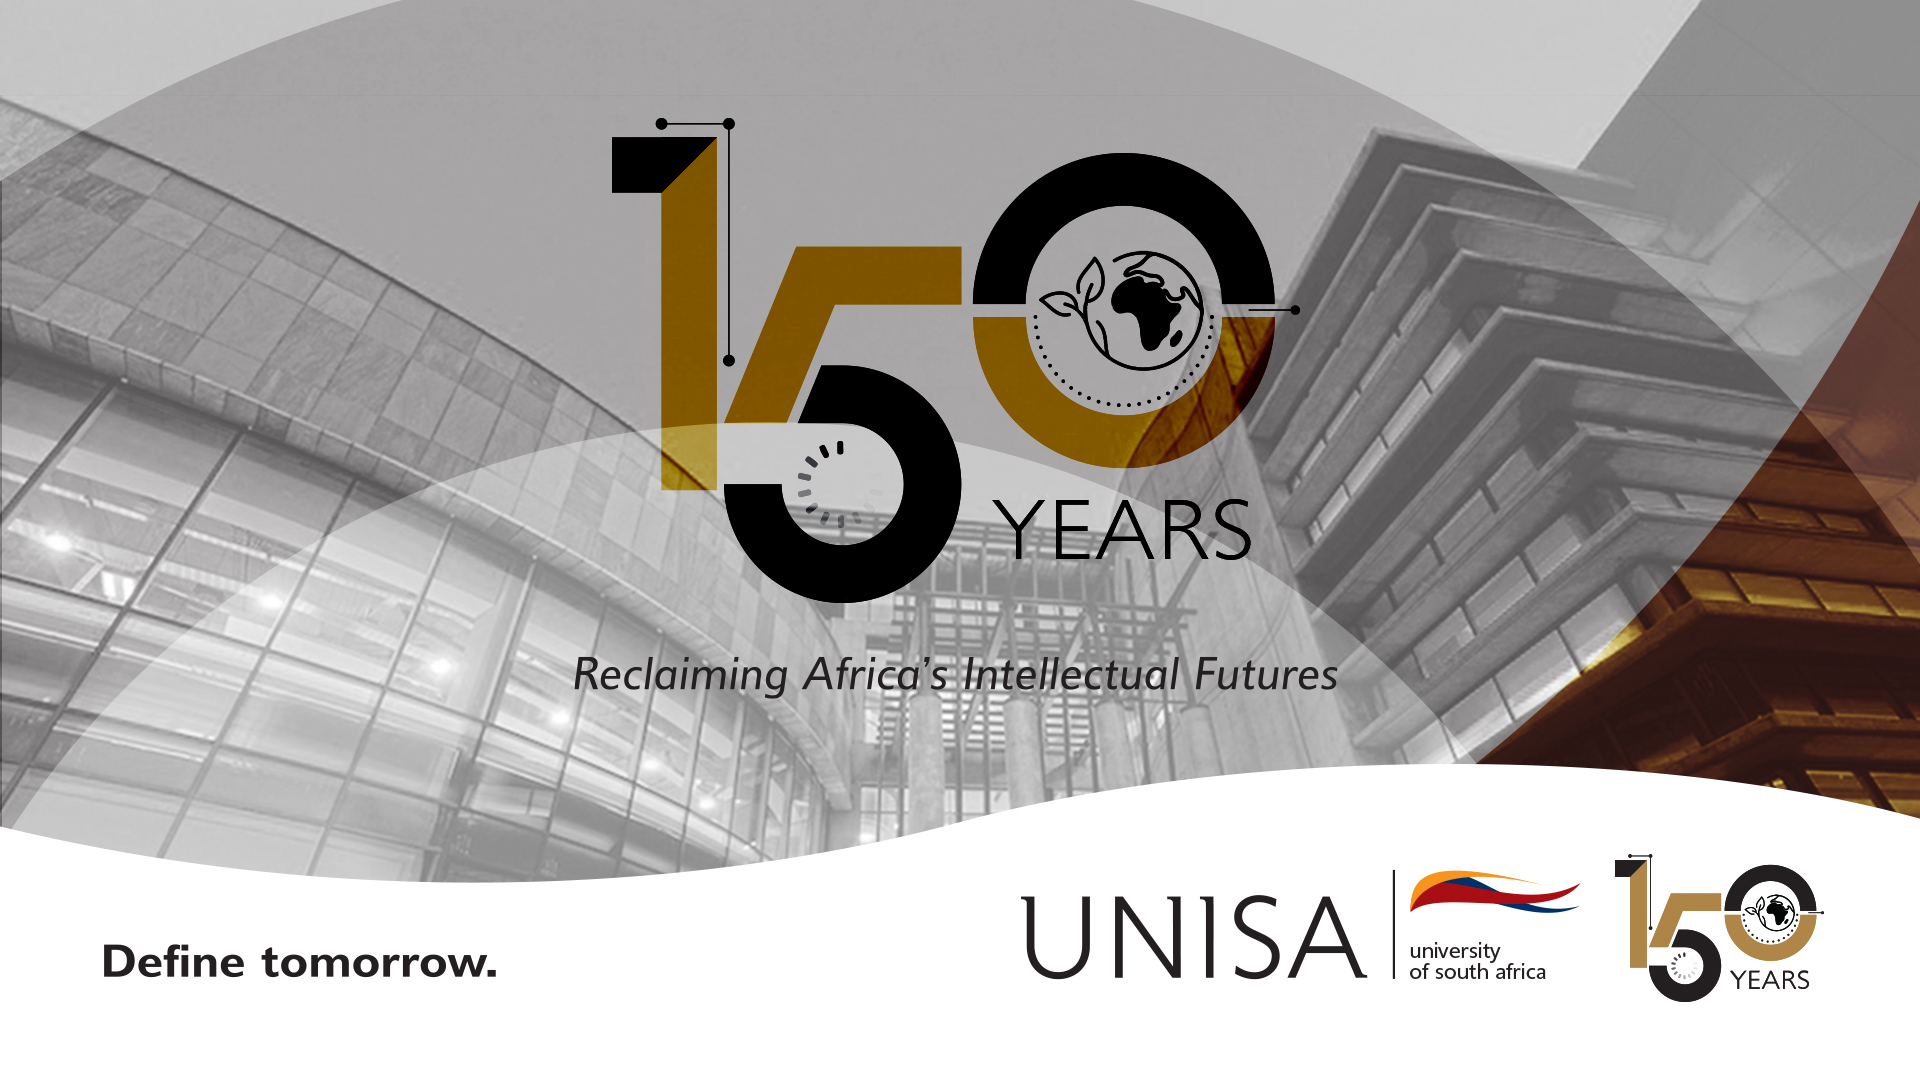 Reclaiming Africa's Intellectual Futures